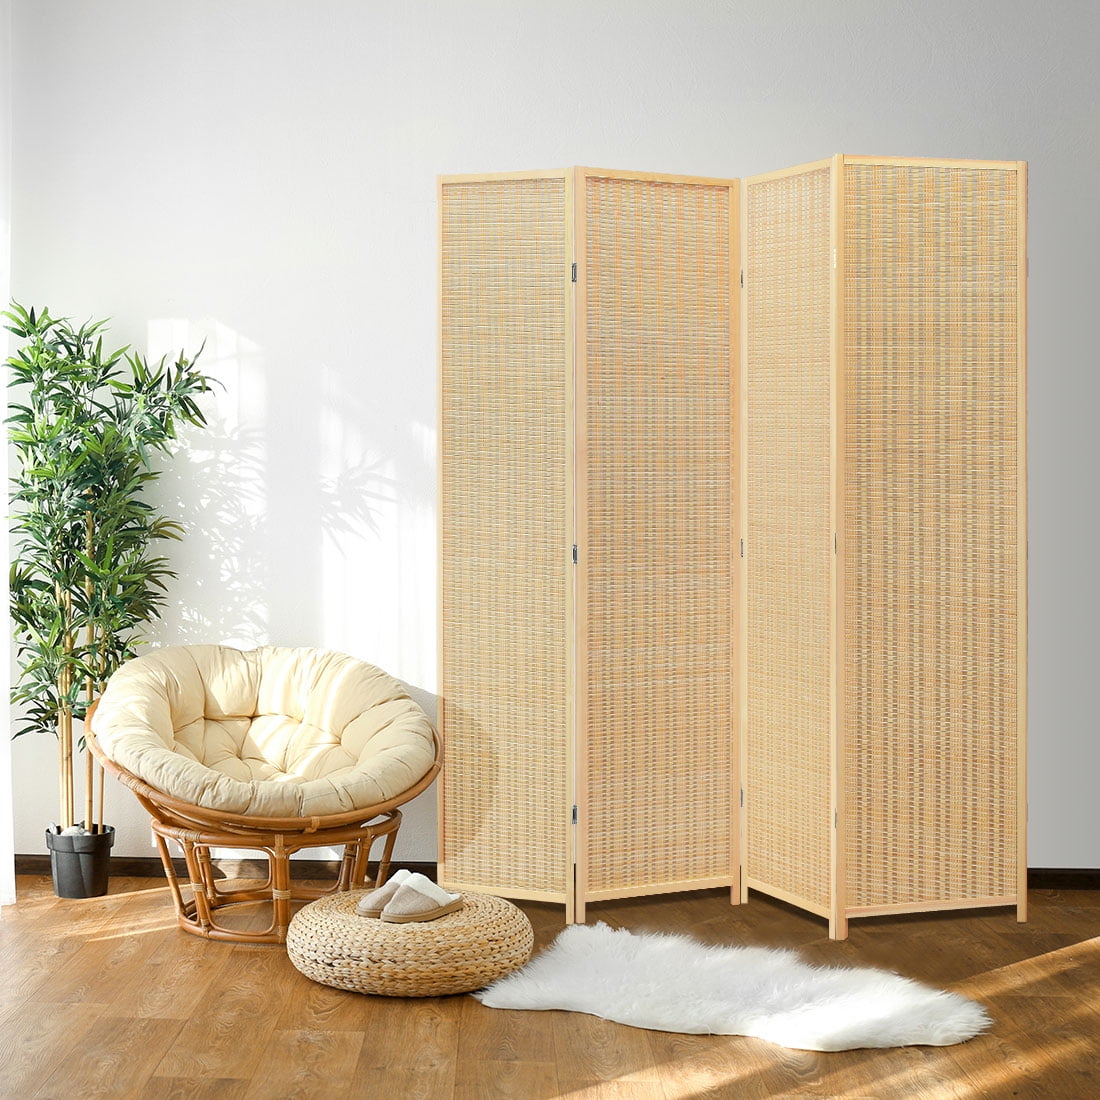 4 Panel Bamboo Room Divider Freestanding Folding Room Screen Privacy Wall J7J4 